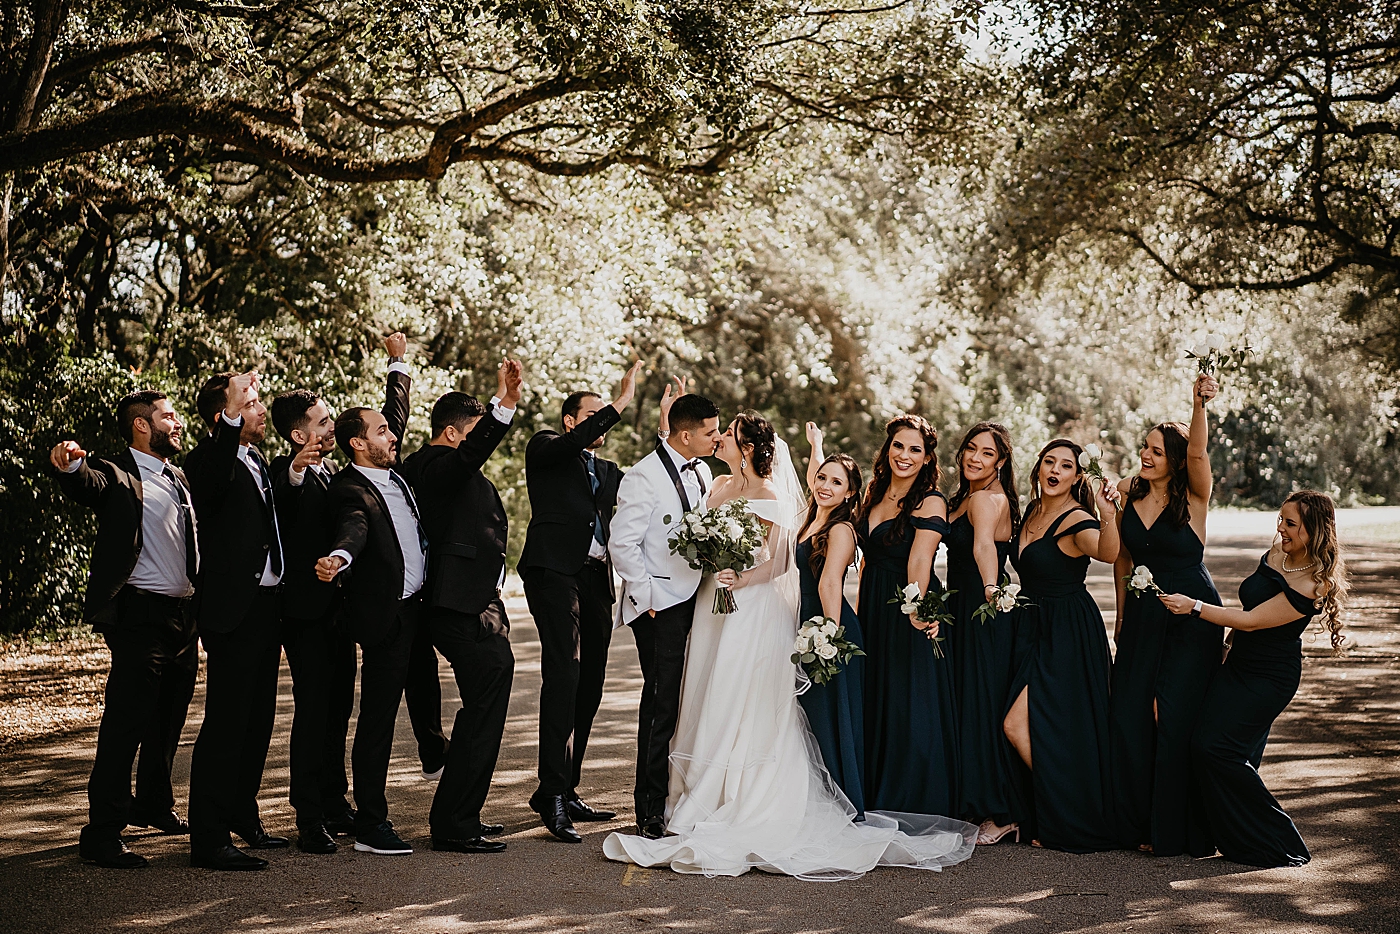 Bride and Groom kissing with Wedding Party cheering them on Lavan Venue Wedding Photography captured by South Florida Wedding Photographer Krystal Capone Photography